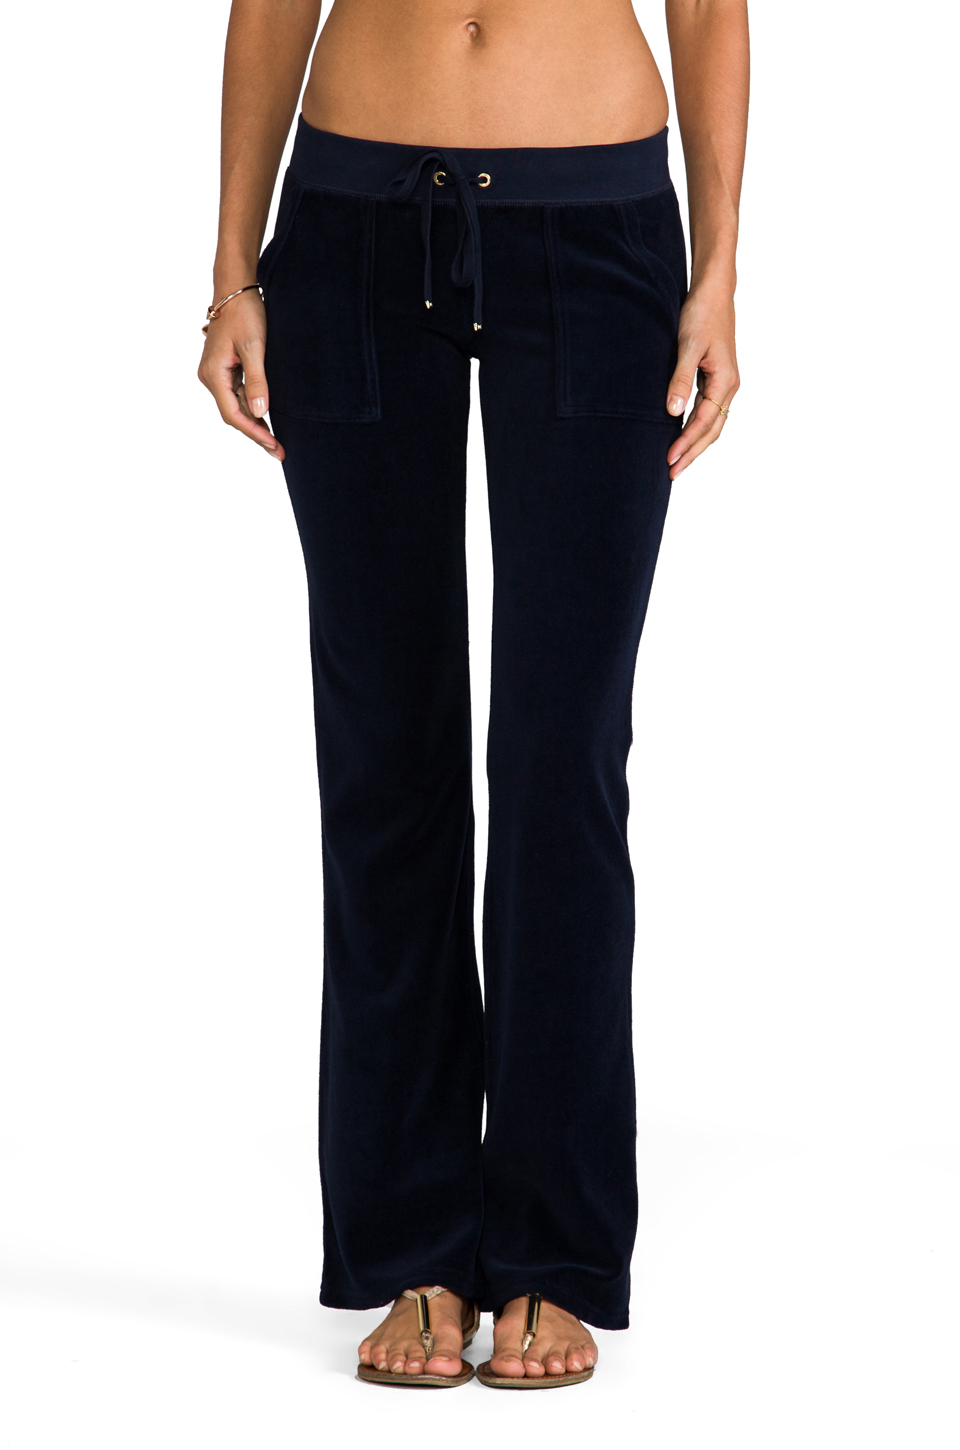 Juicy Couture Velour Flared Leg Pant with Snap Pockets in Blue - Lyst